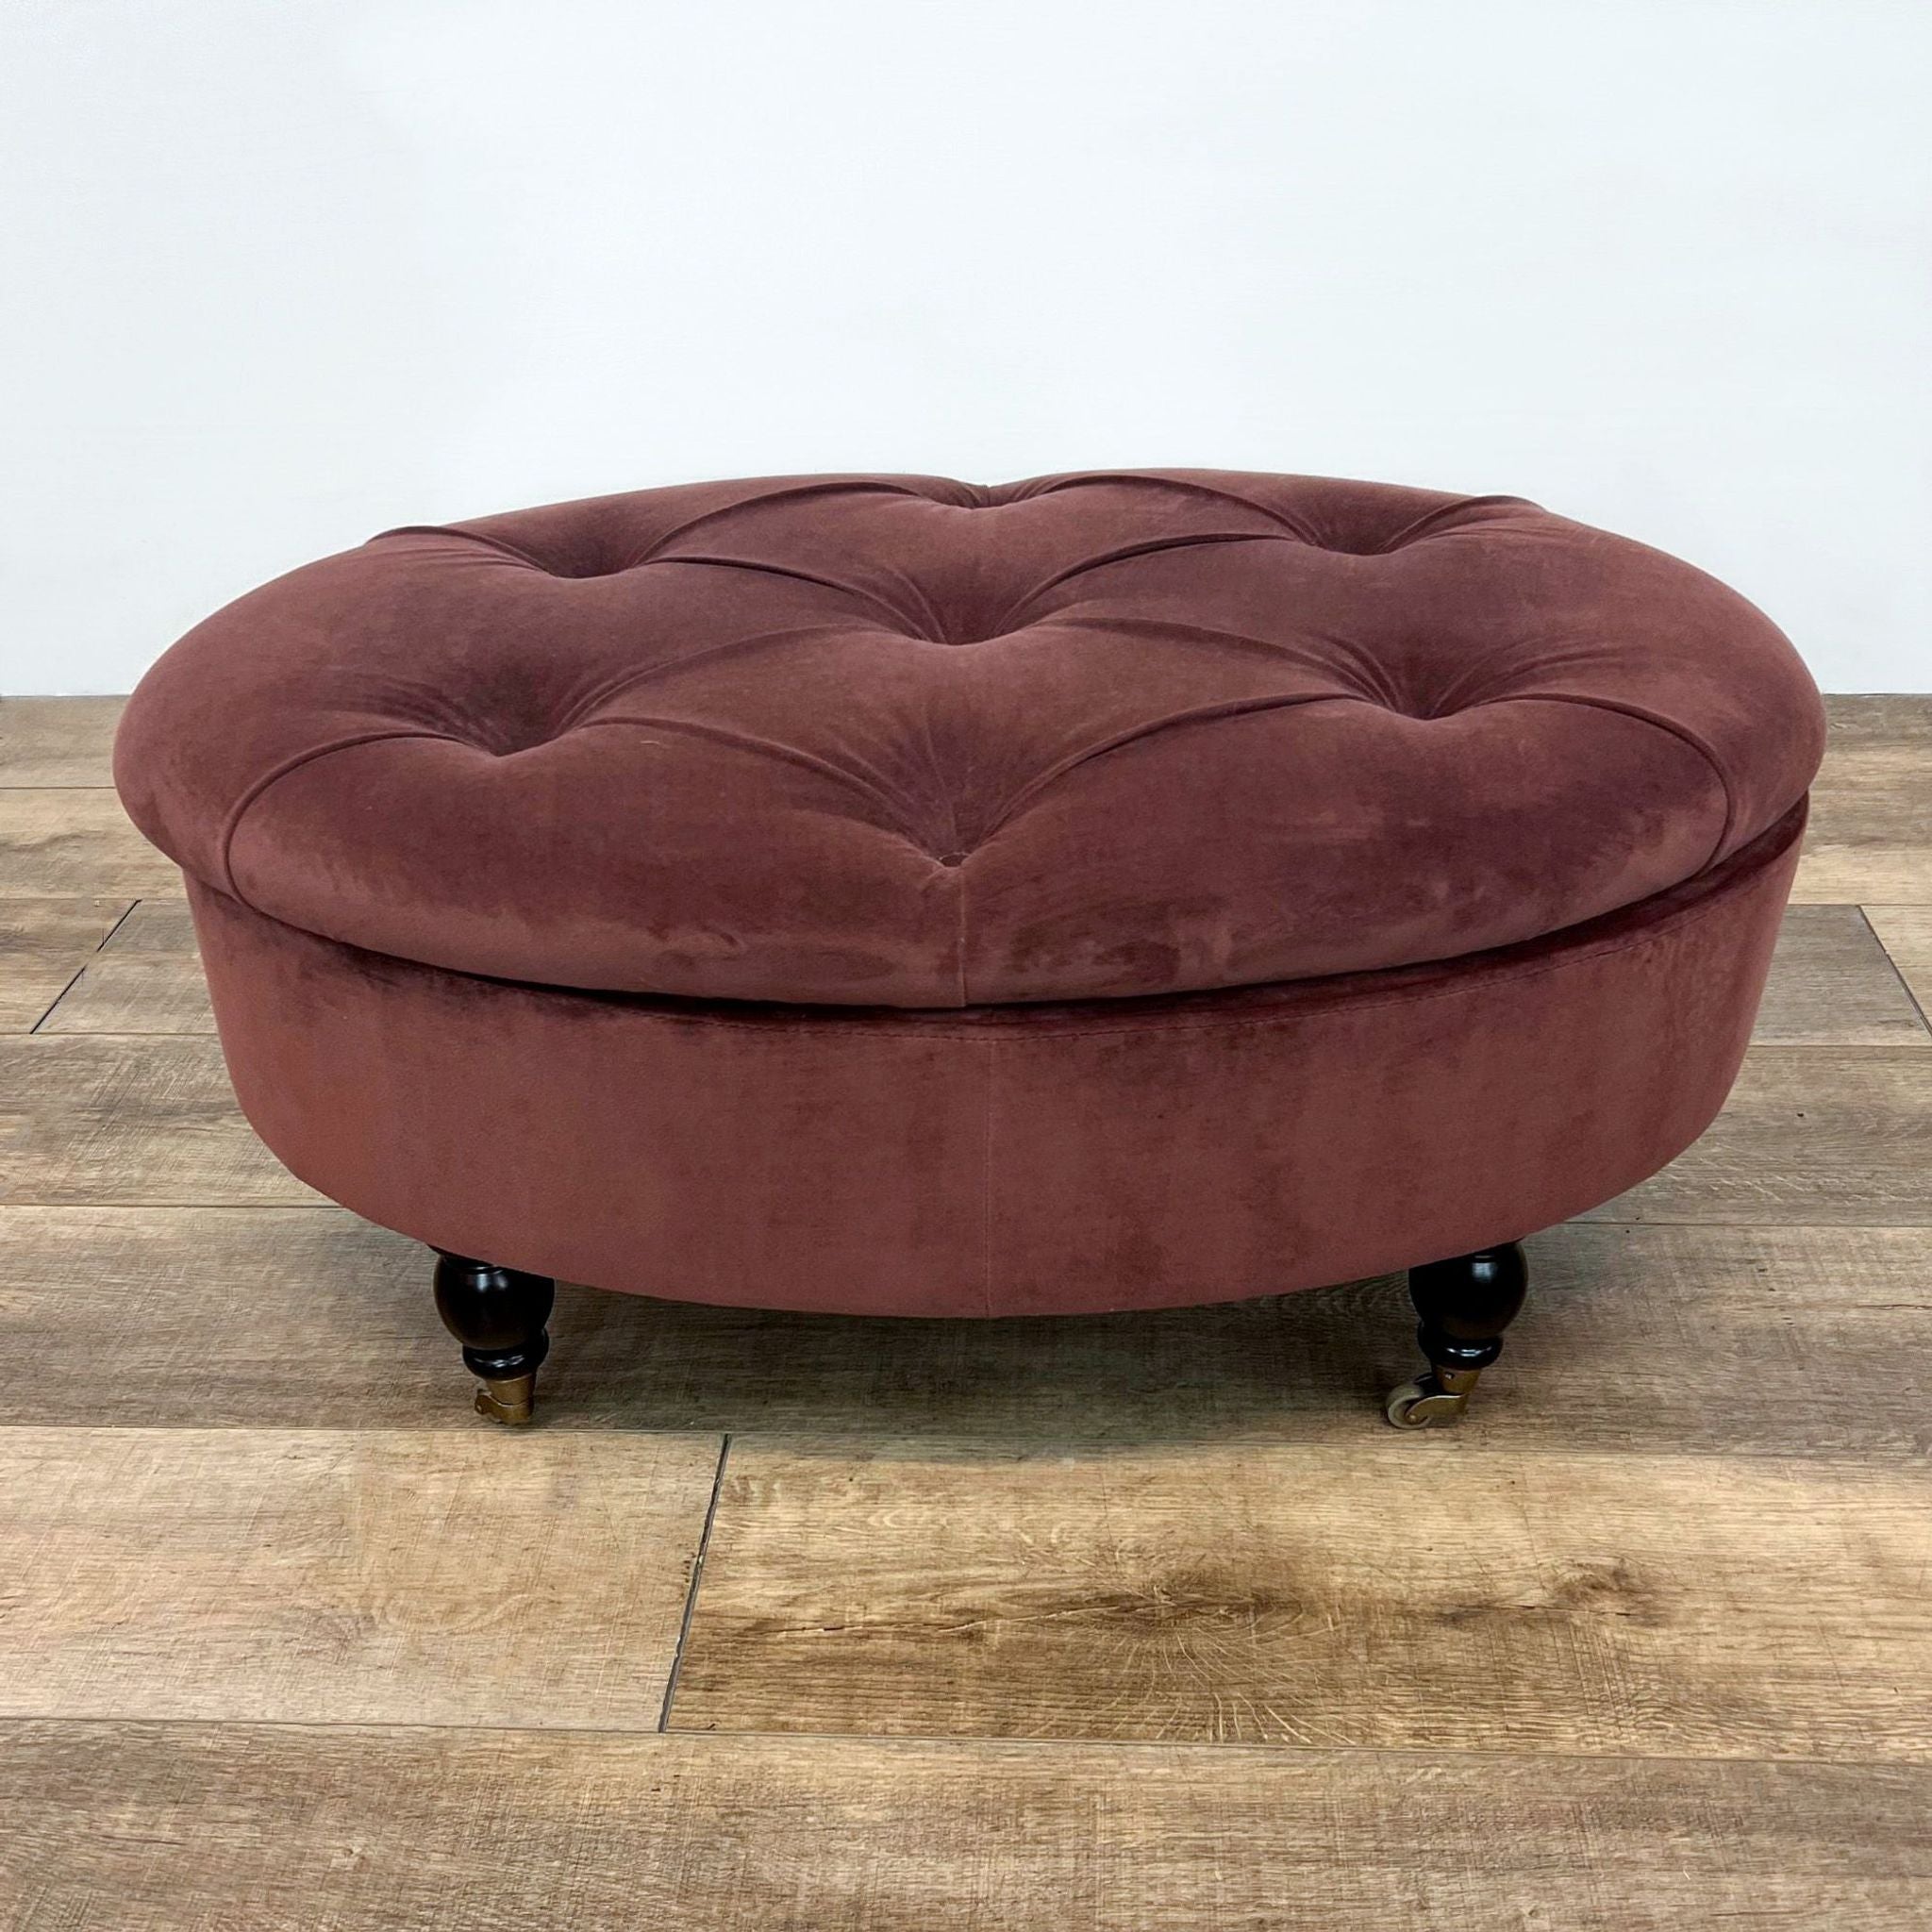 Oval burgundy velvet tufted ottoman with wooden feet and casters, by World Market.